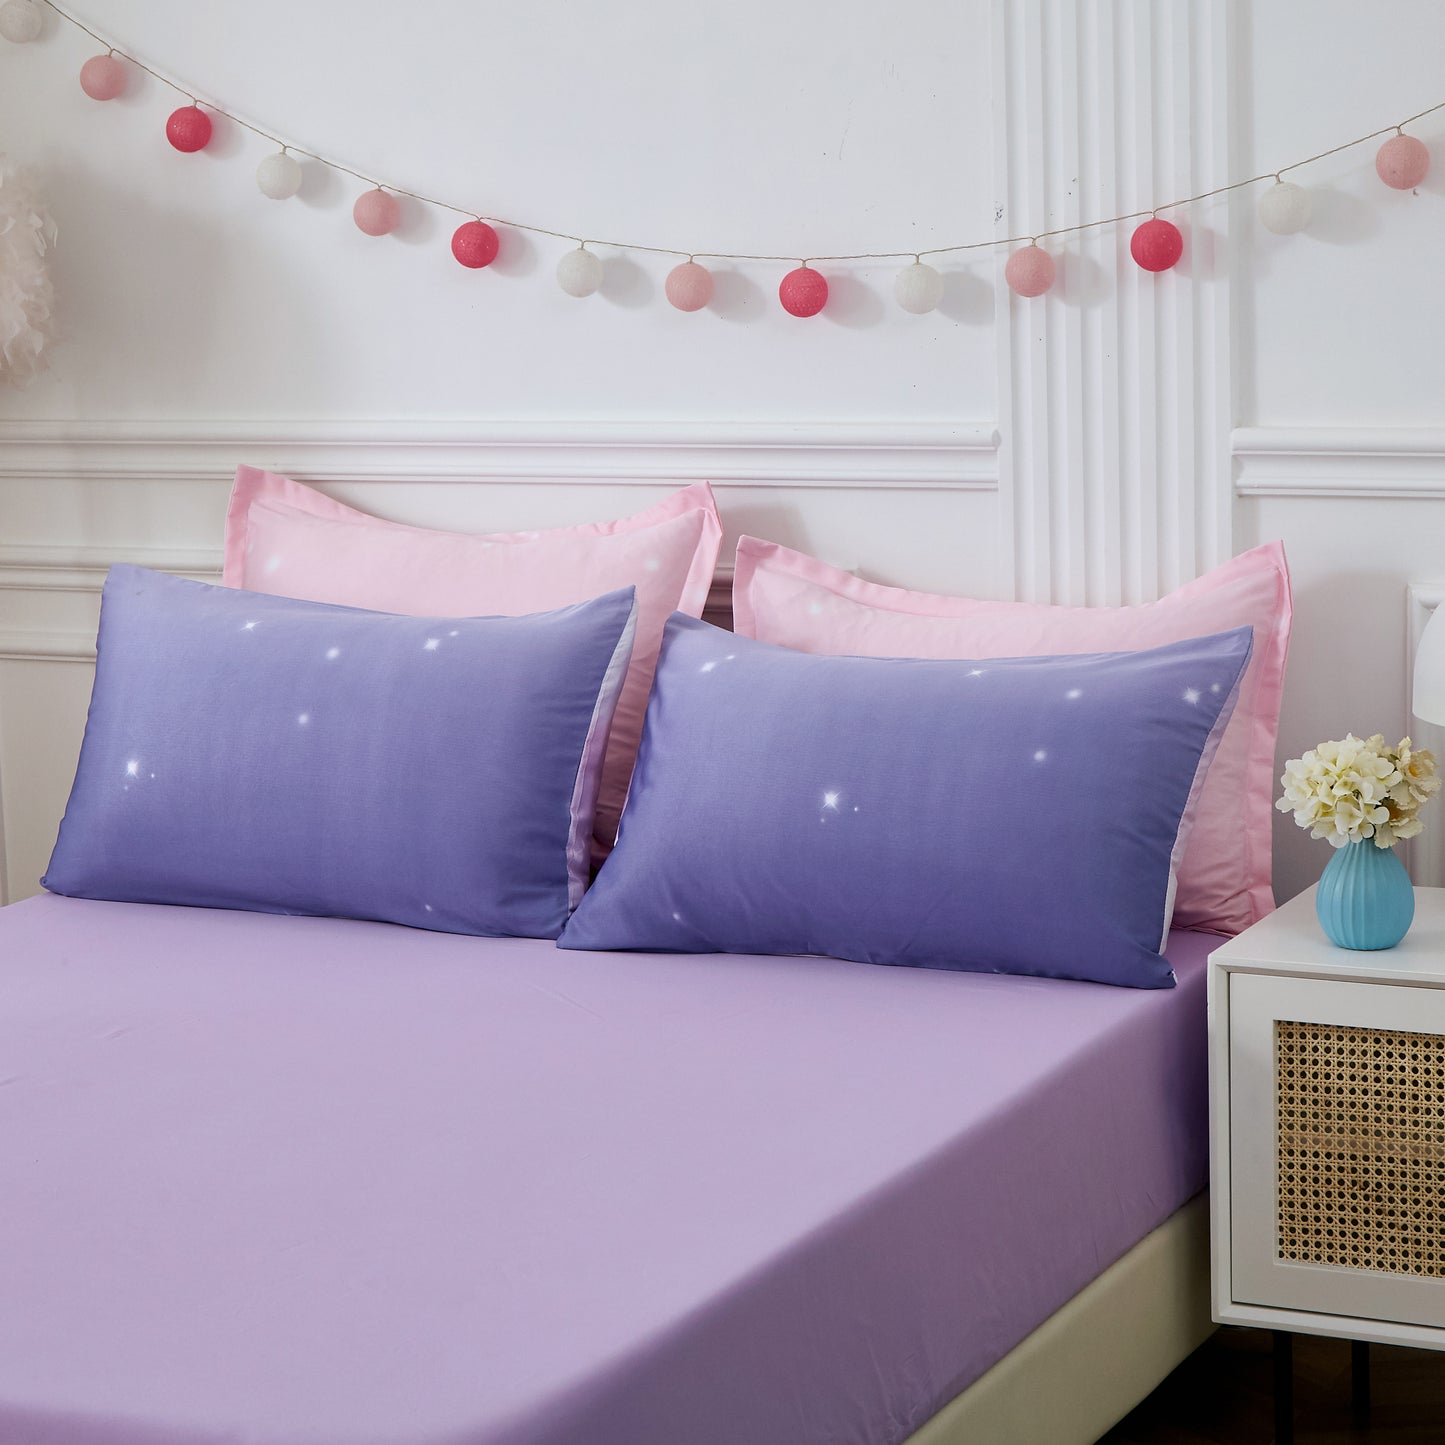 Pink Gradient Starry Sky 7 Pieces Comforter Set With 4 Pillows